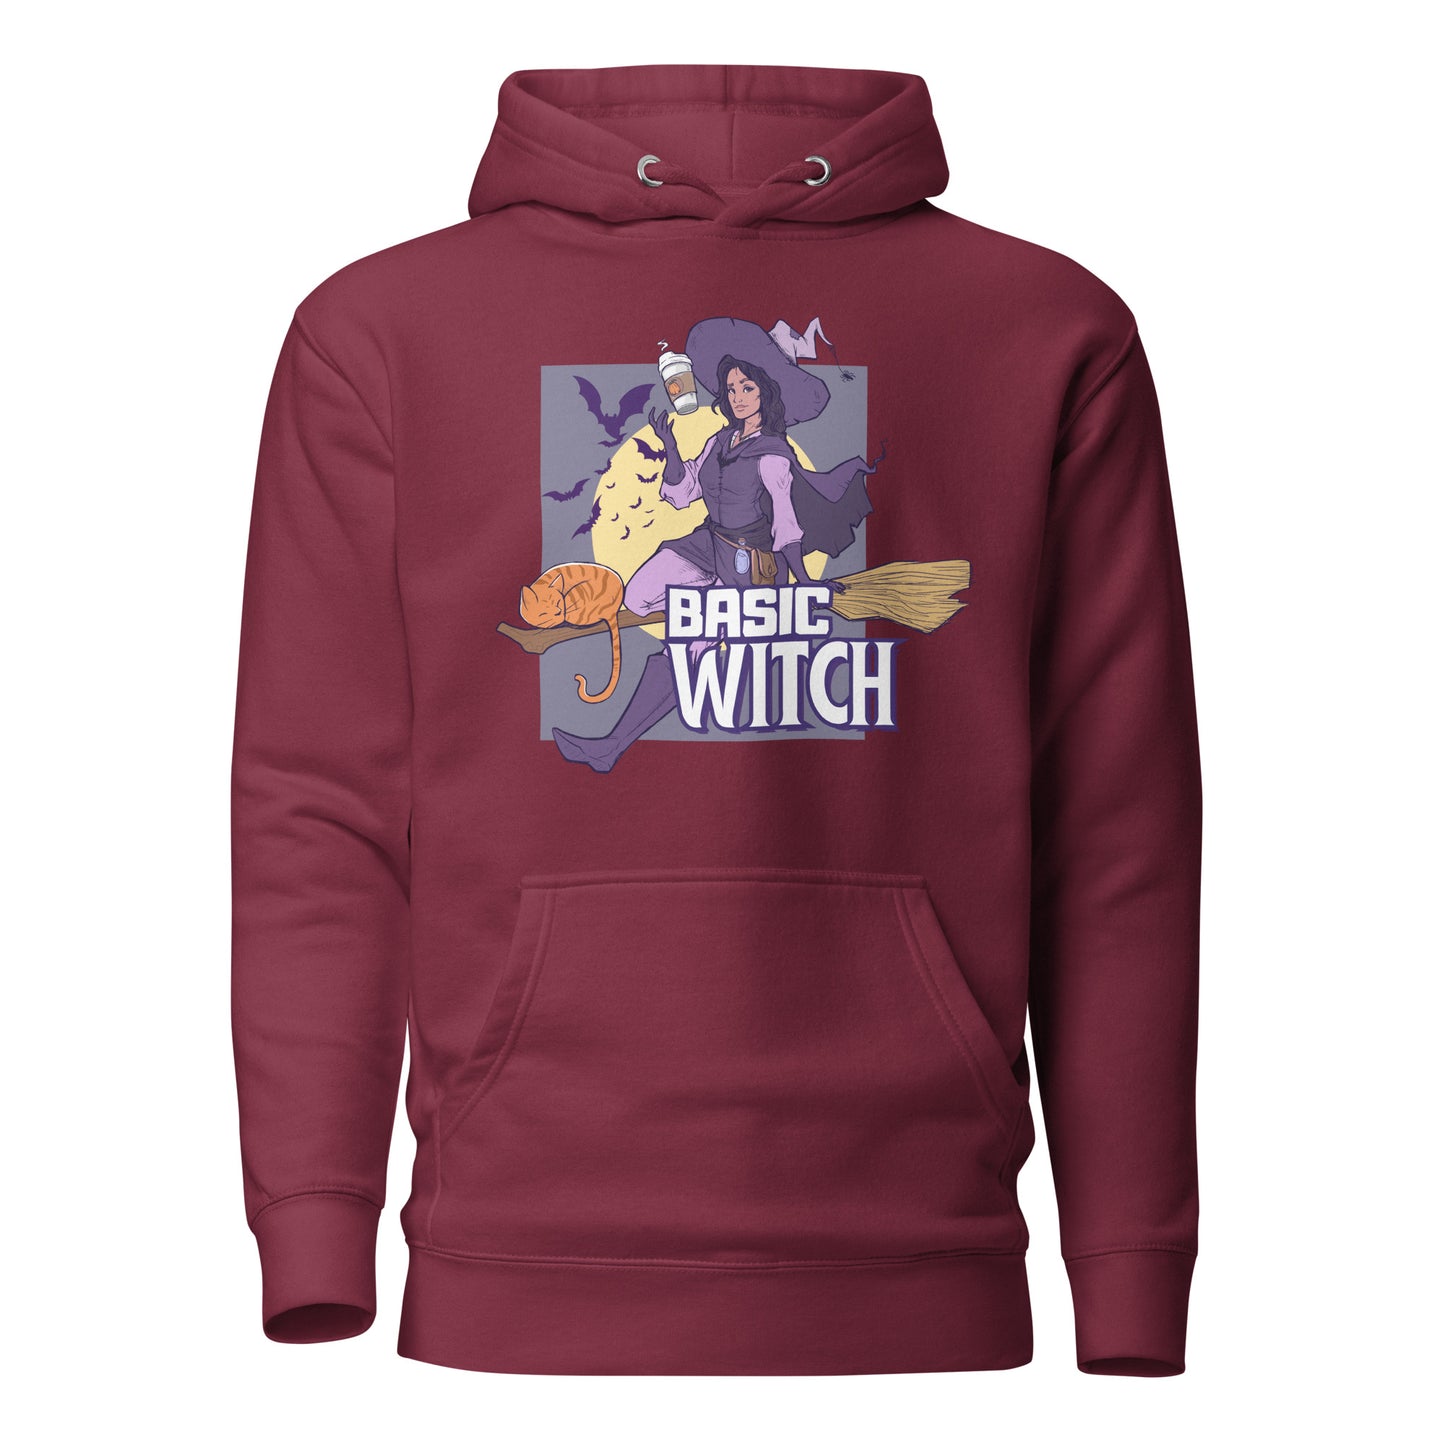 Basic Witch Unisex Hoodie  Level 1 Gamers Maroon S 